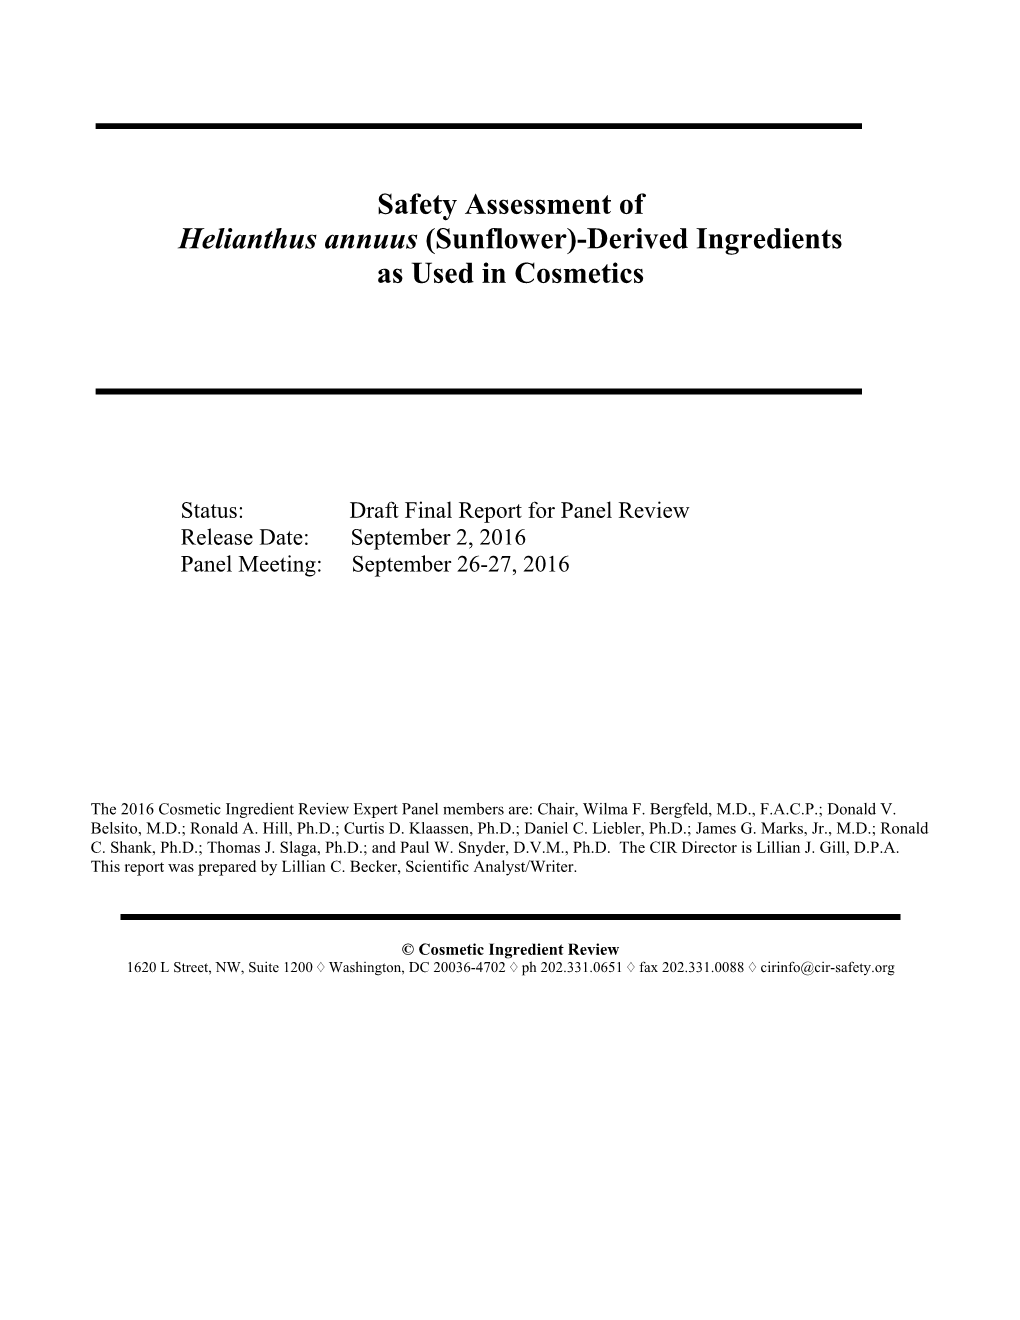 Safety Assessment of Helianthus Annuus (Sunflower)-Derived Ingredients As Used in Cosmetics